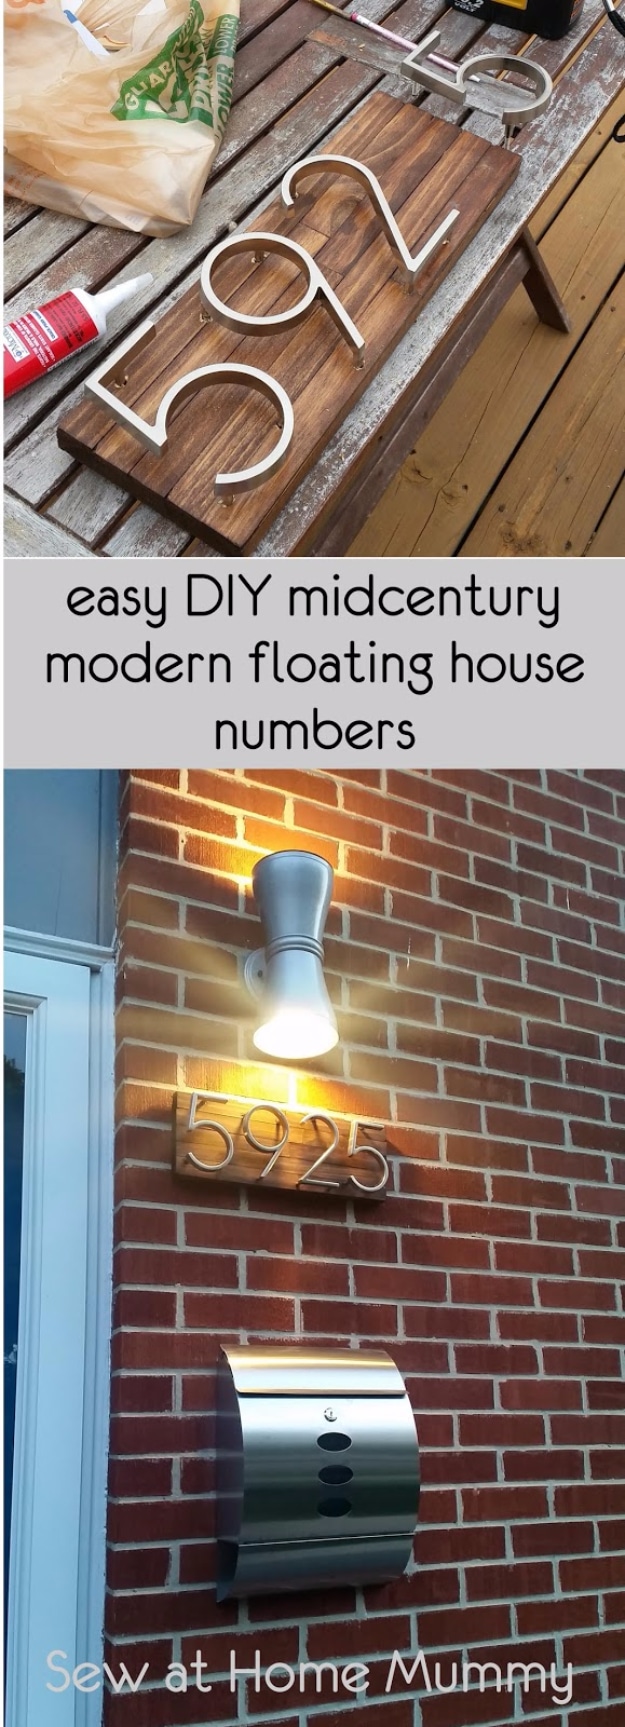 Creative Ways to Increase Curb Appeal on A Budget - Mid Century Modern House Numbers - Cheap and Easy Ideas for Upgrading Your Front Porch, Landscaping, Driveways, Garage Doors, Brick and Home Exteriors. Add Window Boxes, House Numbers, Mailboxes and Yard Makeovers http://diyjoy.com/diy-curb-appeal-ideas